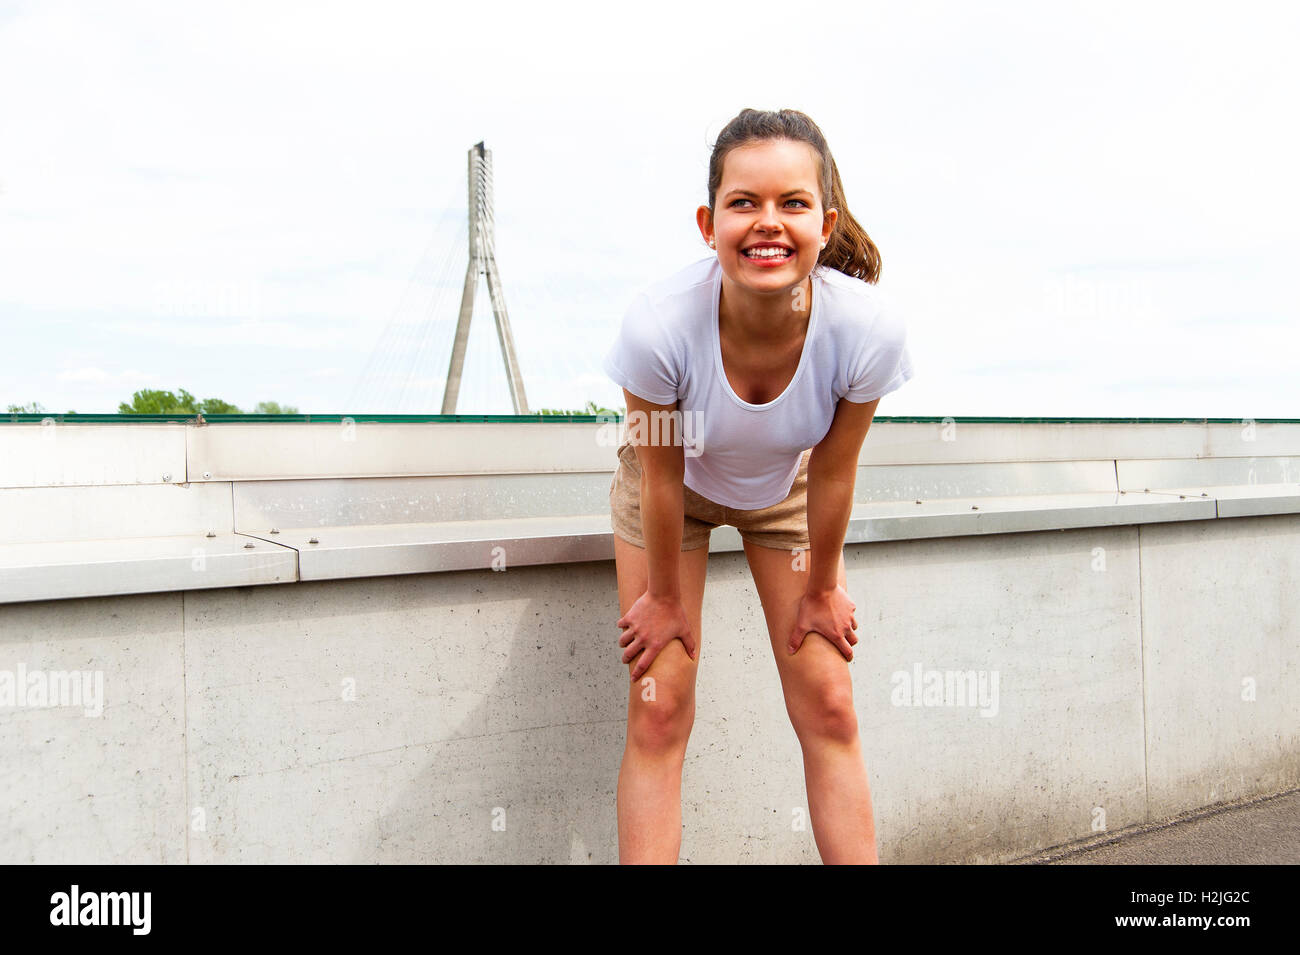 Focused runner outdoors resting with big smile Stock Photo